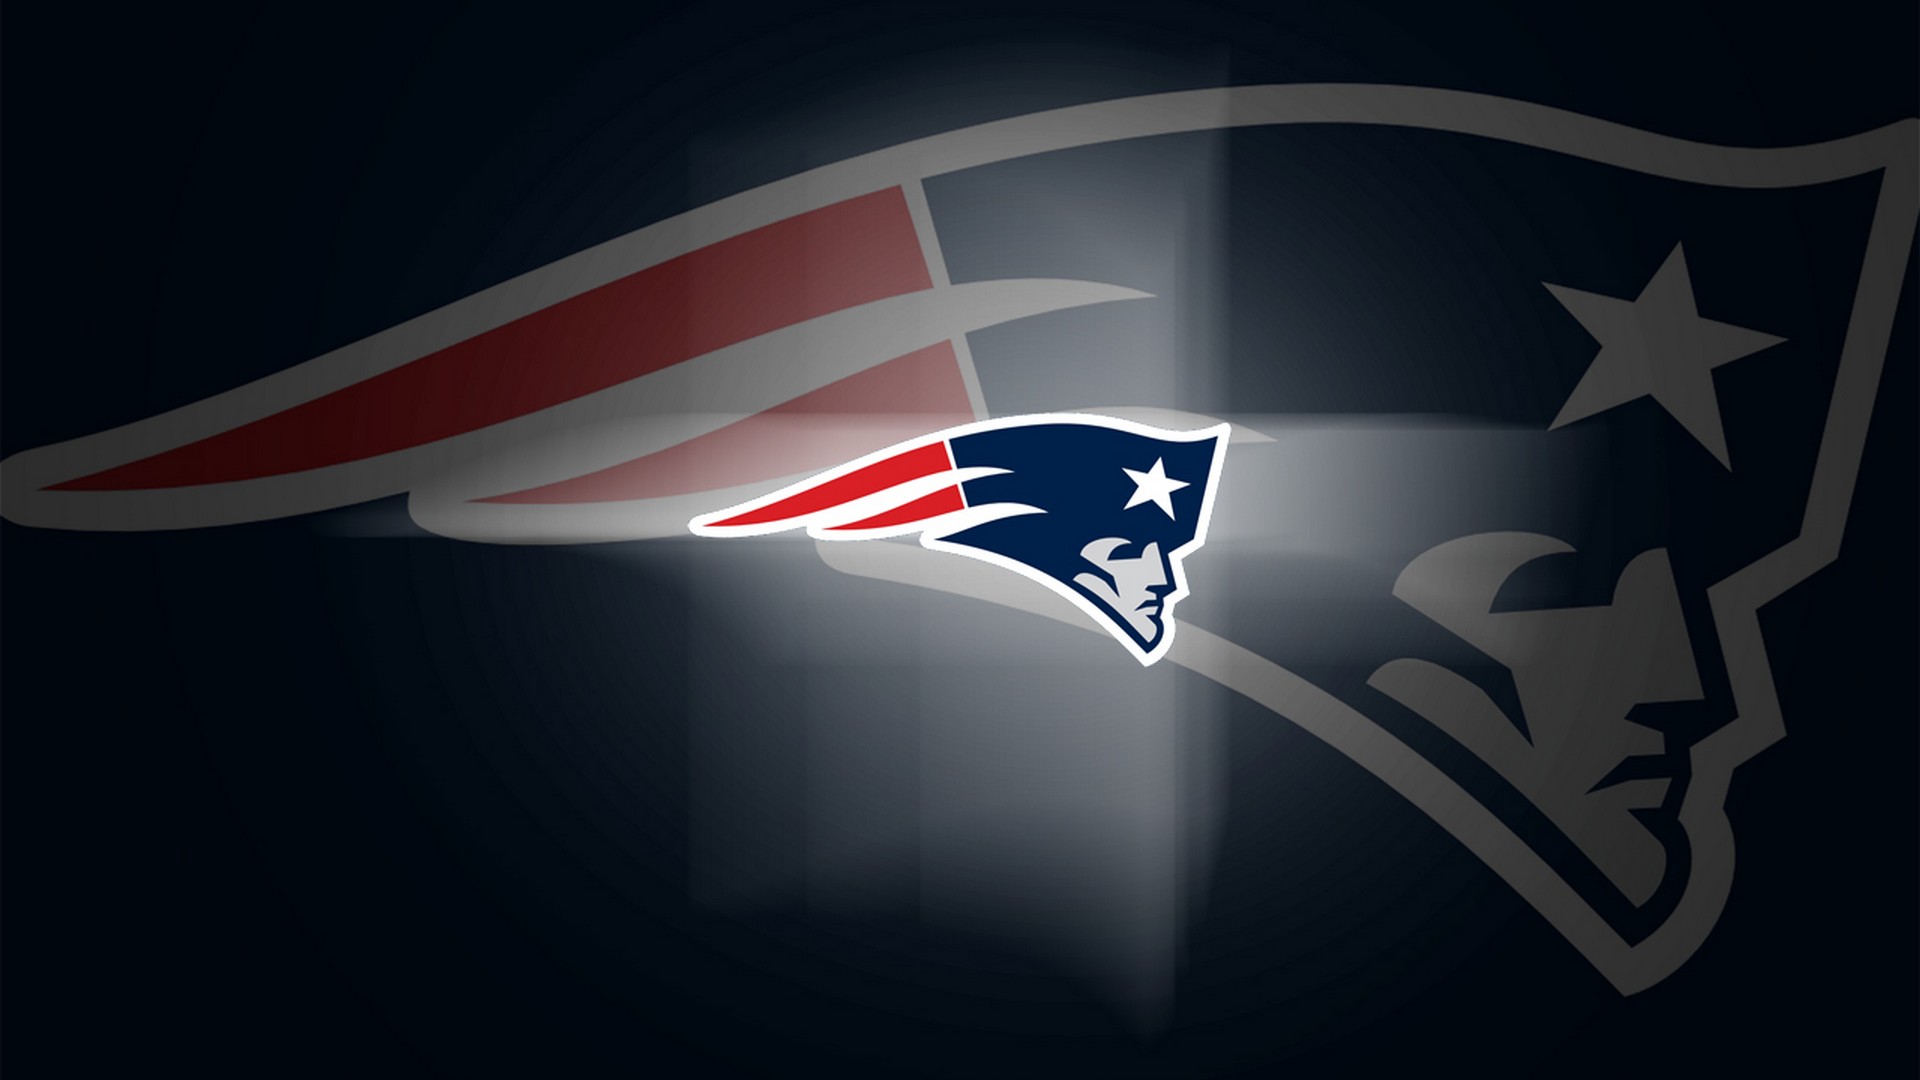 Wallpapers New England Patriots With Resolution 1920X1080 pixel. You can make this wallpaper for your Mac or Windows Desktop Background, iPhone, Android or Tablet and another Smartphone device for free